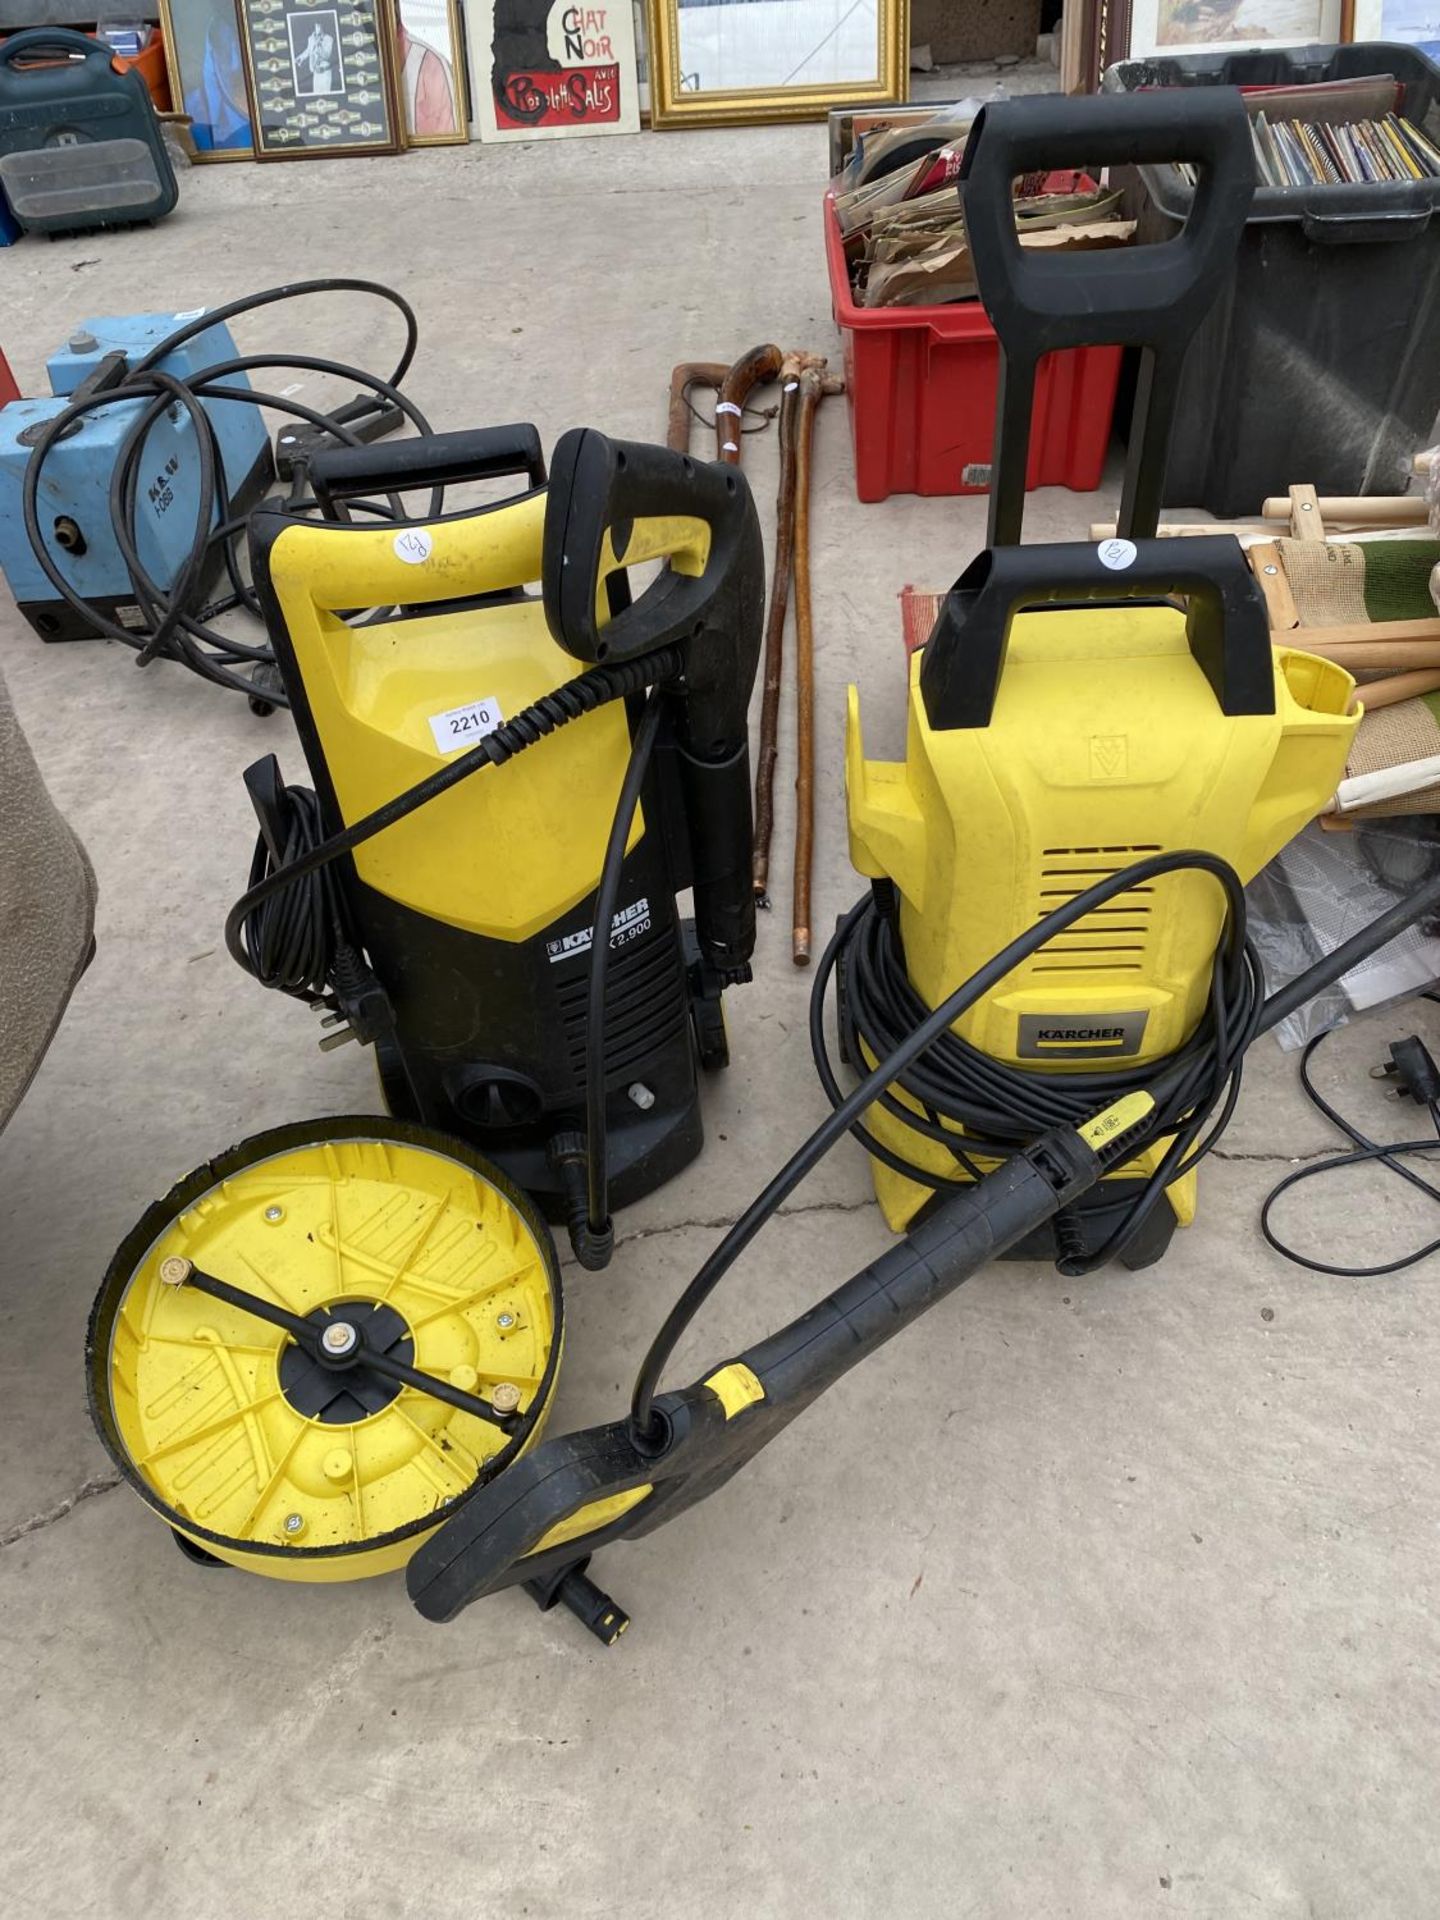 TWO KARCHER ELECTRIC PRESSURE WASHERS